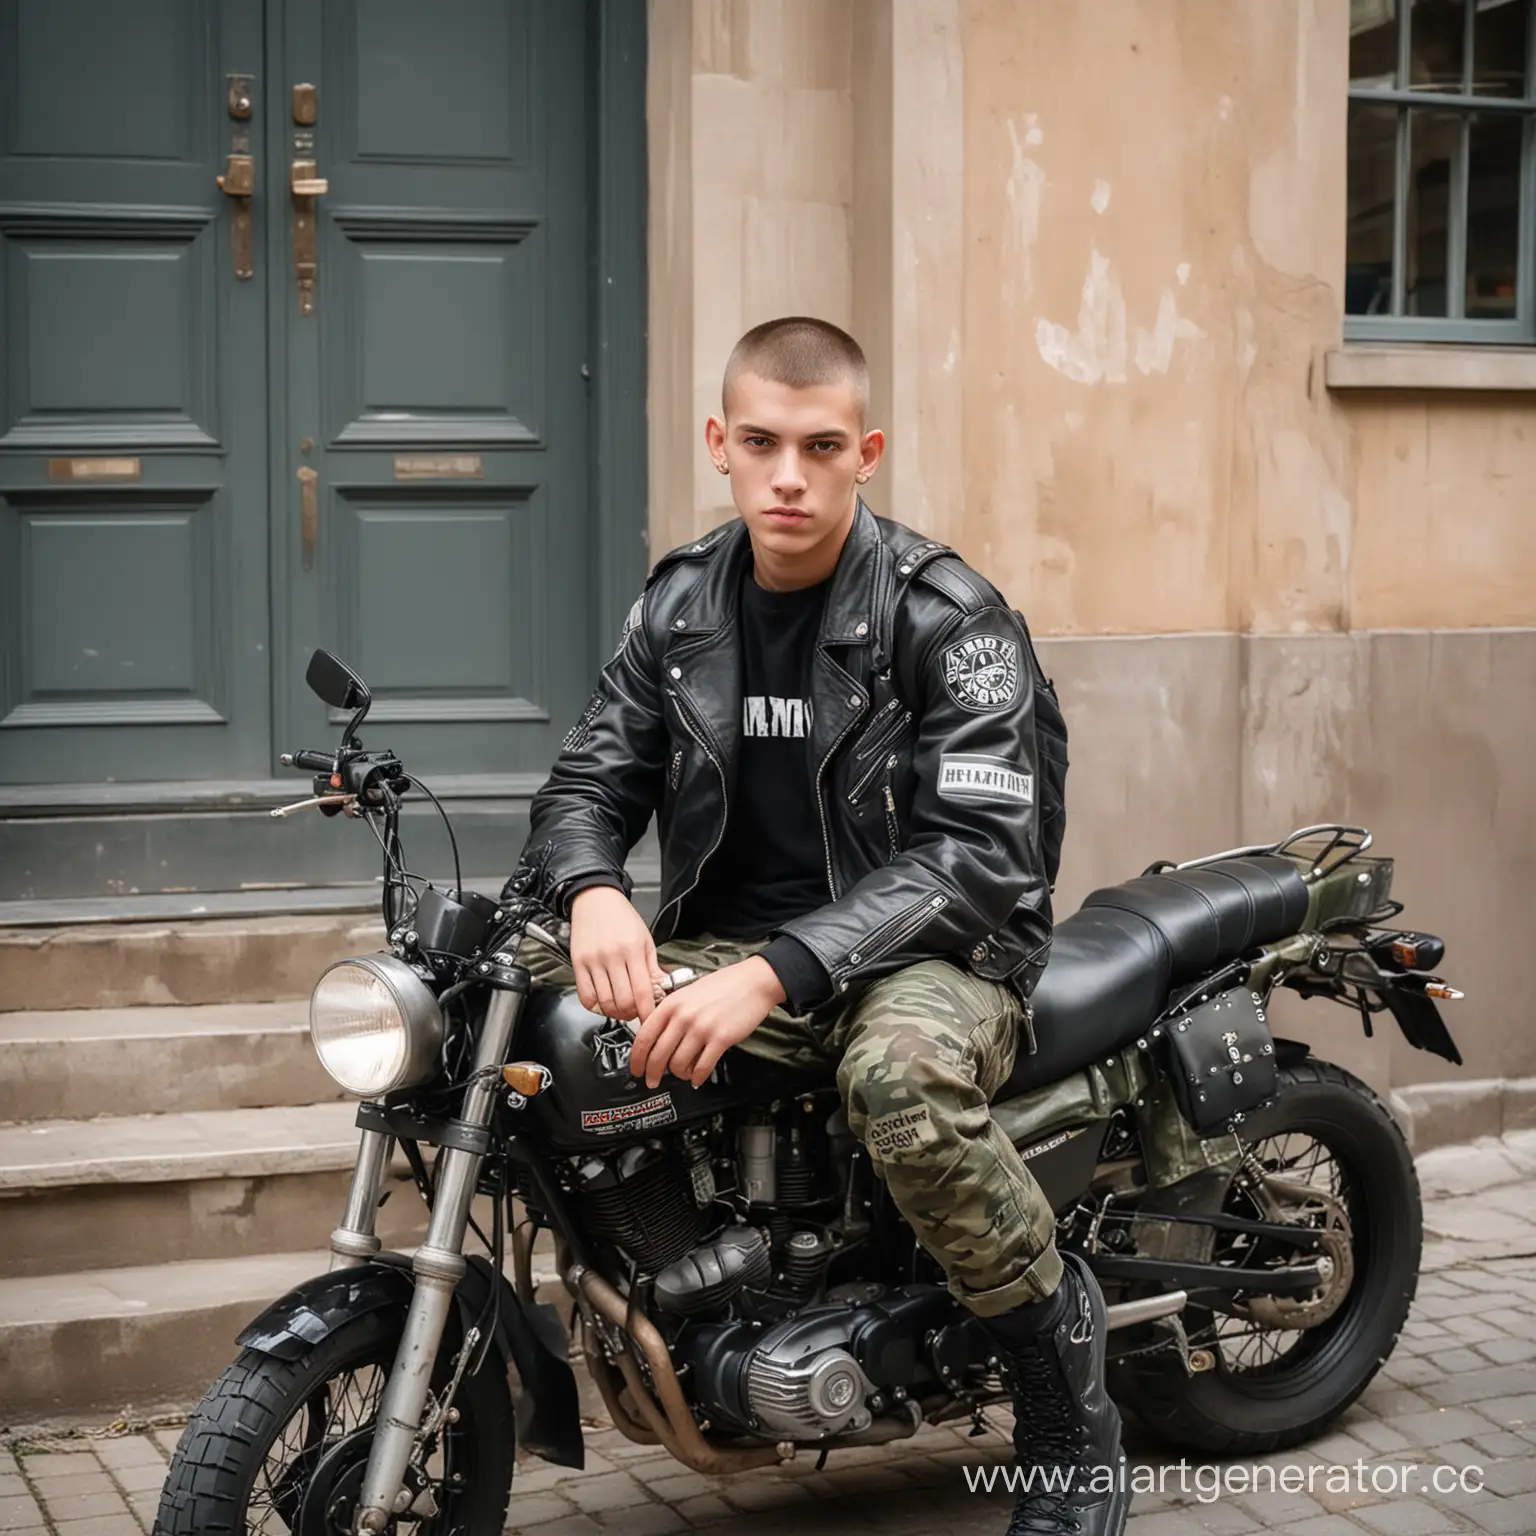 Urban-Teenager-on-Motorcycle-near-Victorian-Architecture